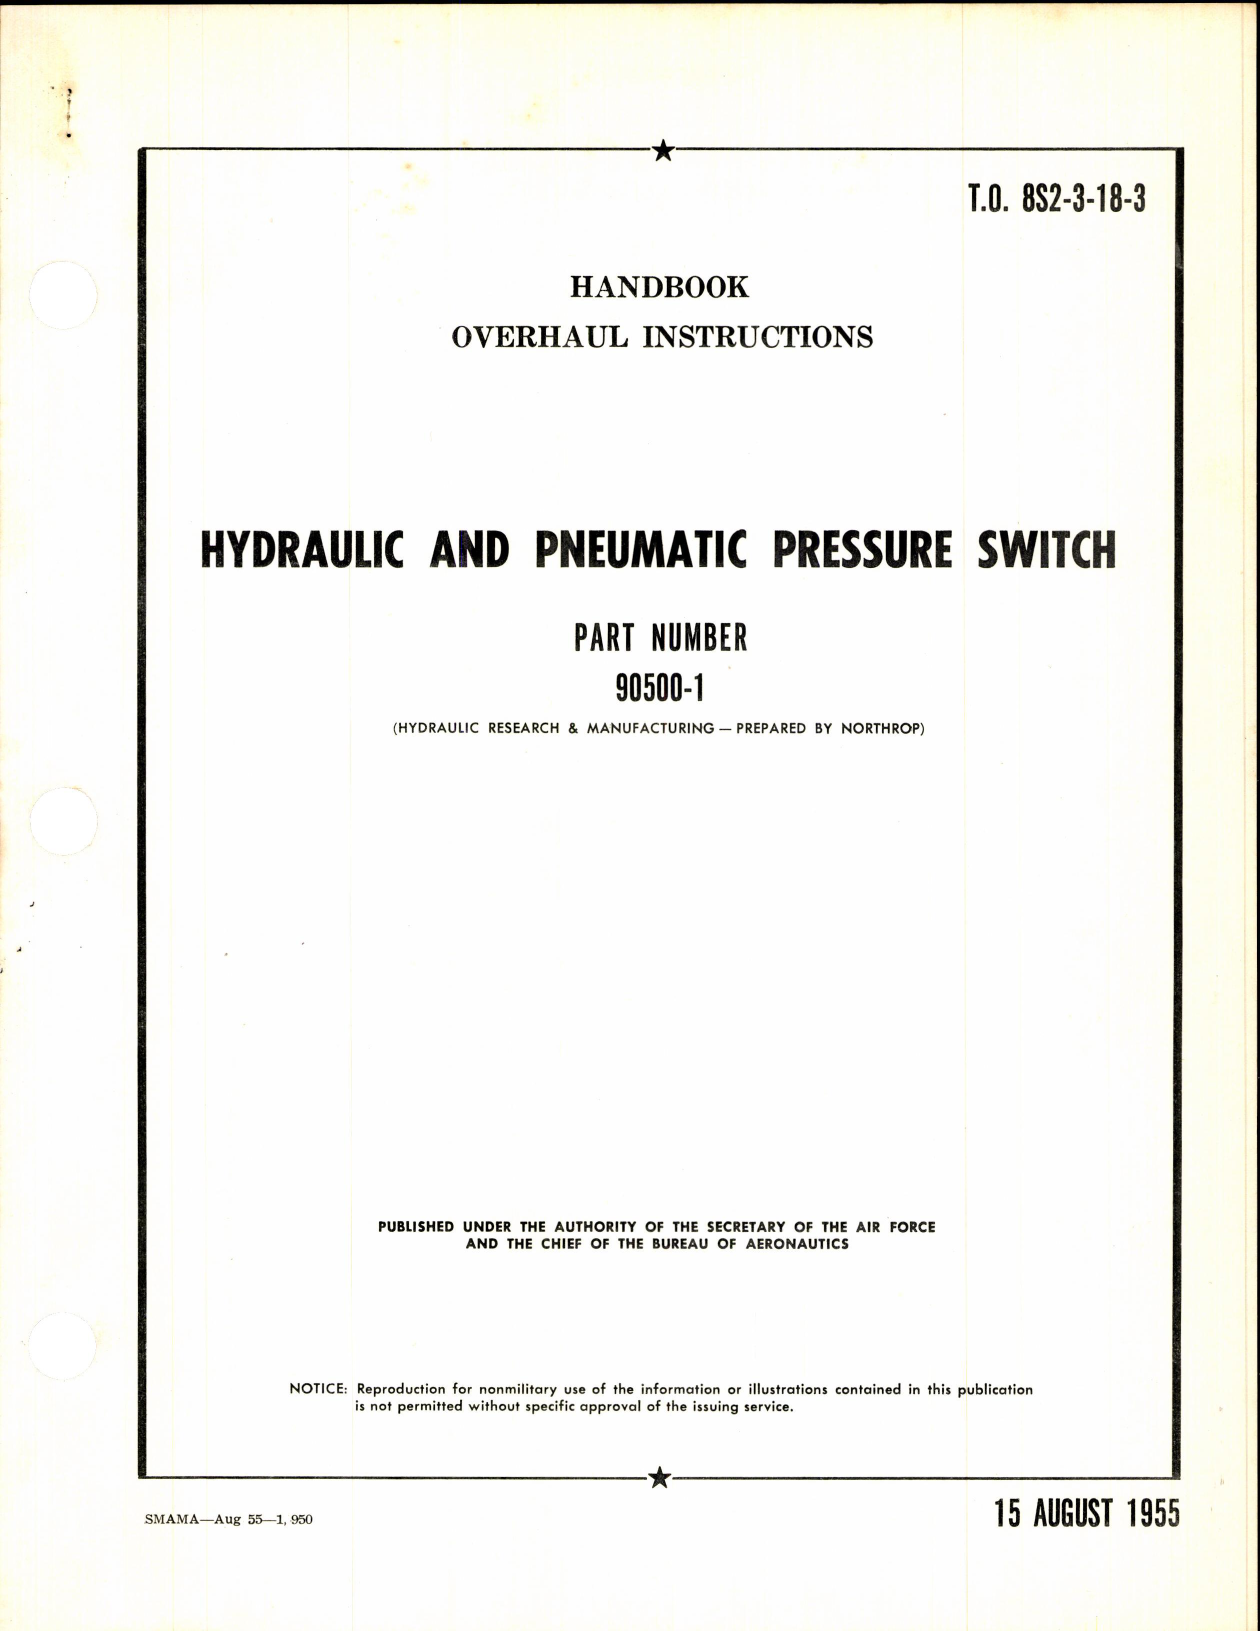 Sample page 1 from AirCorps Library document: Hydraulic and Pneumatic Pressure Switch Part No 90500-1